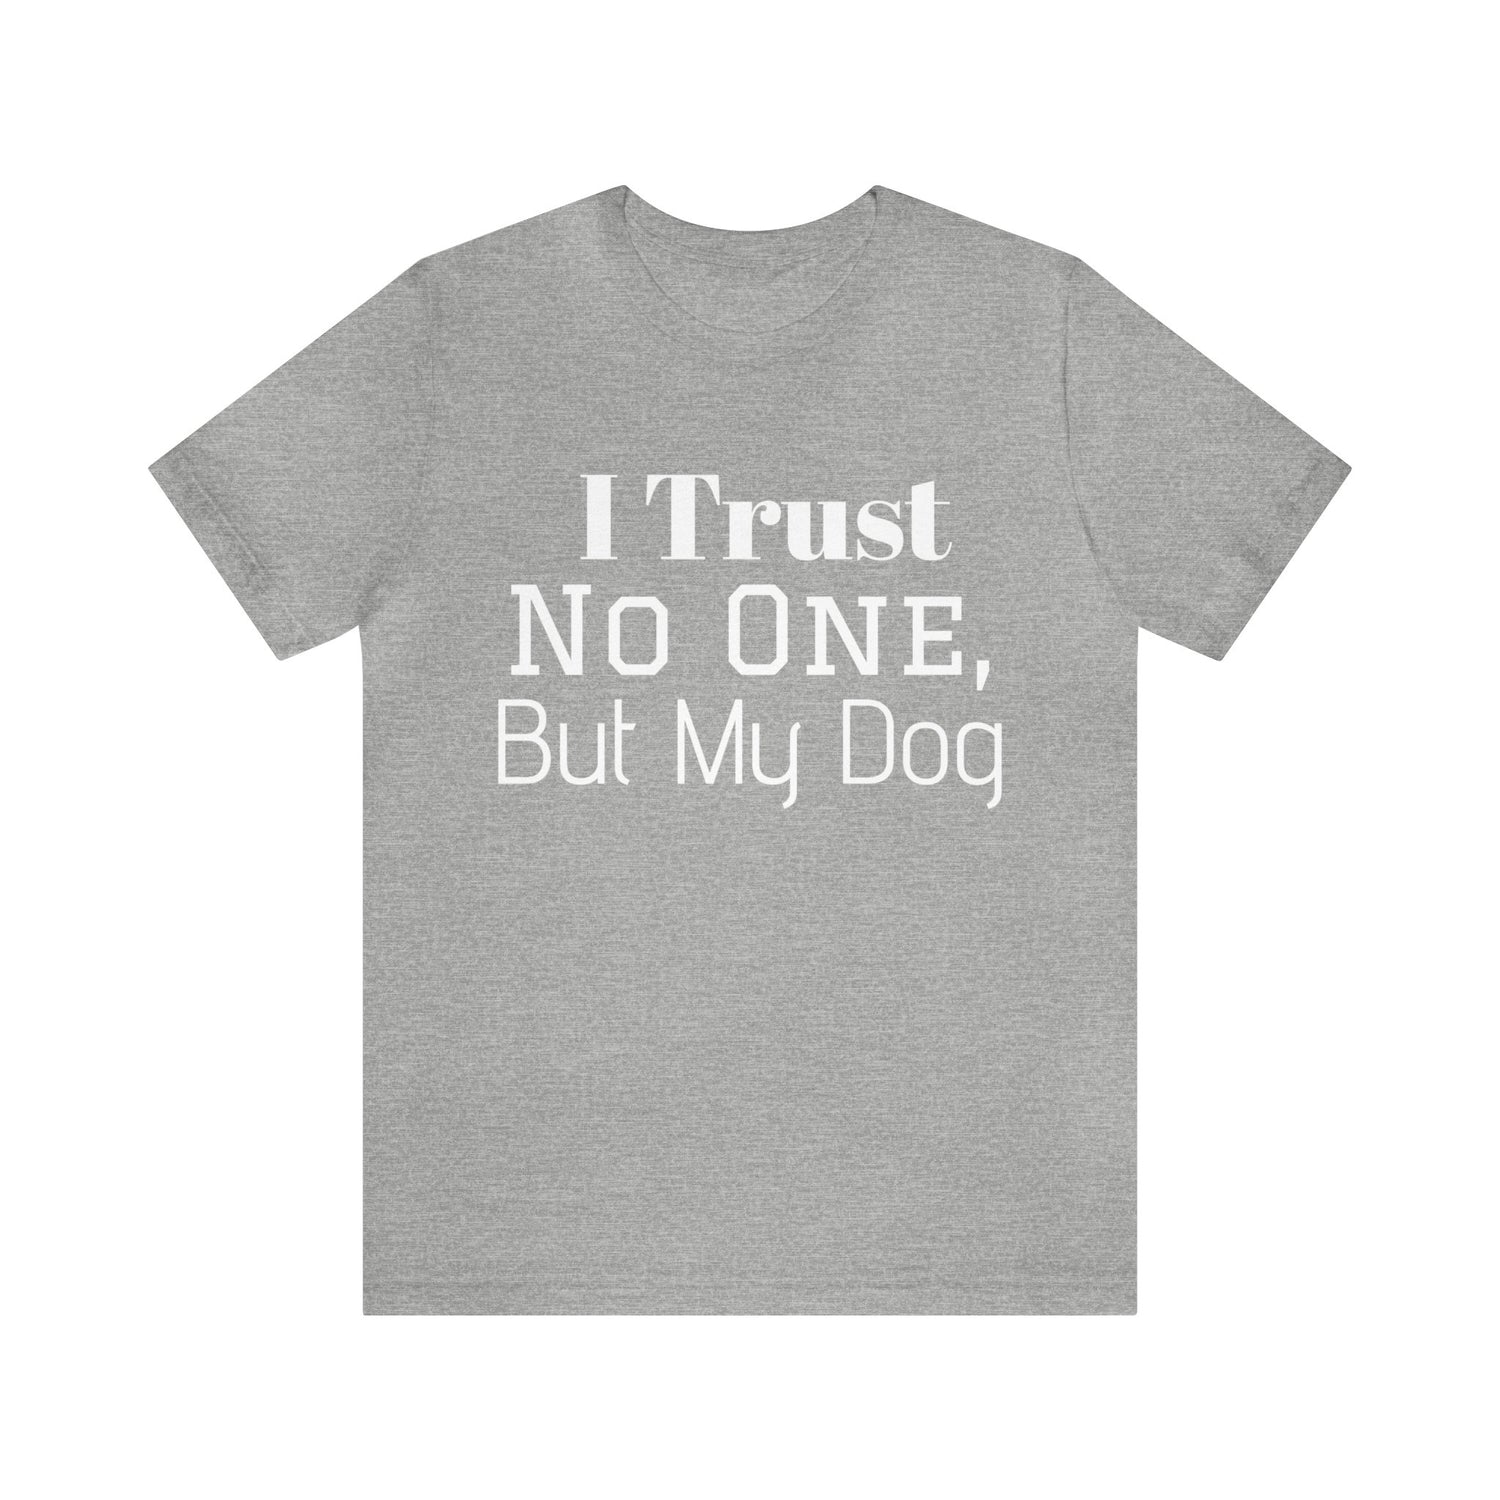 Bold Statement Canine Casual Wear Companionship Cotton Dog Dog Bond Dog Lover Dog Owner Funny Furry Friend Gift Humor Humorous Loyalty Pet Petrova Designs Relaxed Fit T-shirts Trust Trustworthy Companion Unconditional Trust Unisex Witty